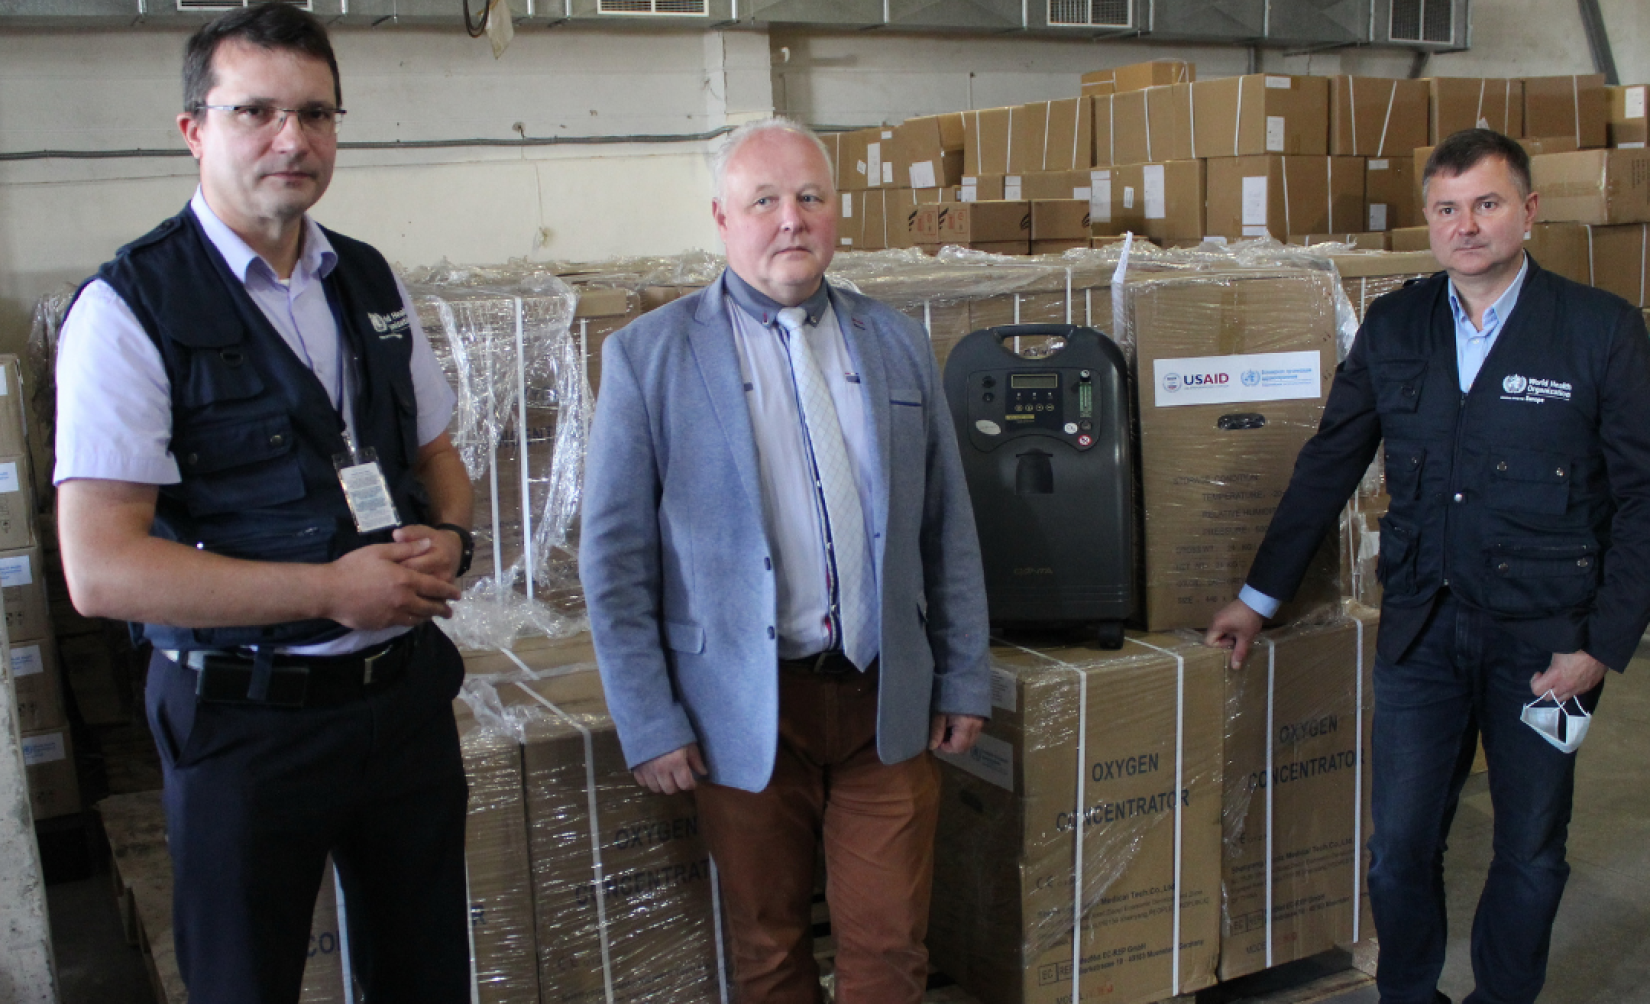 The World Health Organization, in cooperation with the United States Agency for International Development (USAID), supplied 250 oxygen concentrators to Belarus